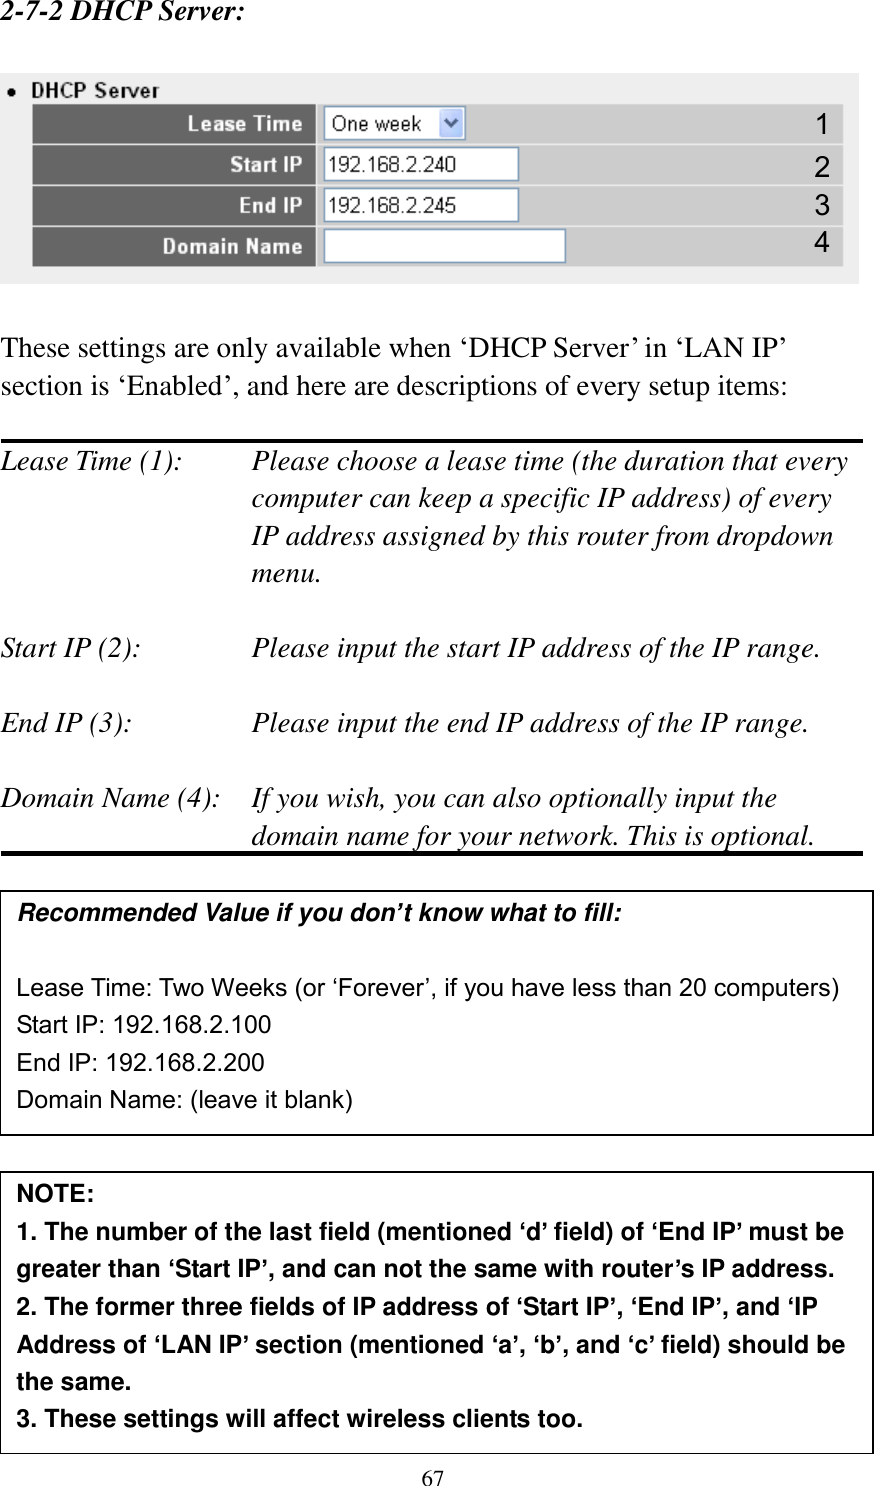 67 2-7-2 DHCP Server:    These settings are only available when „DHCP Server‟ in „LAN IP‟ section is „Enabled‟, and here are descriptions of every setup items:  Lease Time (1):    Please choose a lease time (the duration that every computer can keep a specific IP address) of every IP address assigned by this router from dropdown menu.  Start IP (2):      Please input the start IP address of the IP range.  End IP (3):       Please input the end IP address of the IP range.  Domain Name (4):    If you wish, you can also optionally input the domain name for your network. This is optional.                Recommended Value if you don’t know what to fill:  Lease Time: Two Weeks (or ‘Forever’, if you have less than 20 computers) Start IP: 192.168.2.100 End IP: 192.168.2.200 Domain Name: (leave it blank) NOTE:   1. The number of the last field (mentioned ‘d’ field) of ‘End IP’ must be greater than ‘Start IP’, and can not the same with router’s IP address. 2. The former three fields of IP address of ‘Start IP’, ‘End IP’, and ‘IP Address of ‘LAN IP’ section (mentioned ‘a’, ‘b’, and ‘c’ field) should be the same. 3. These settings will affect wireless clients too. 1 3 4 2 